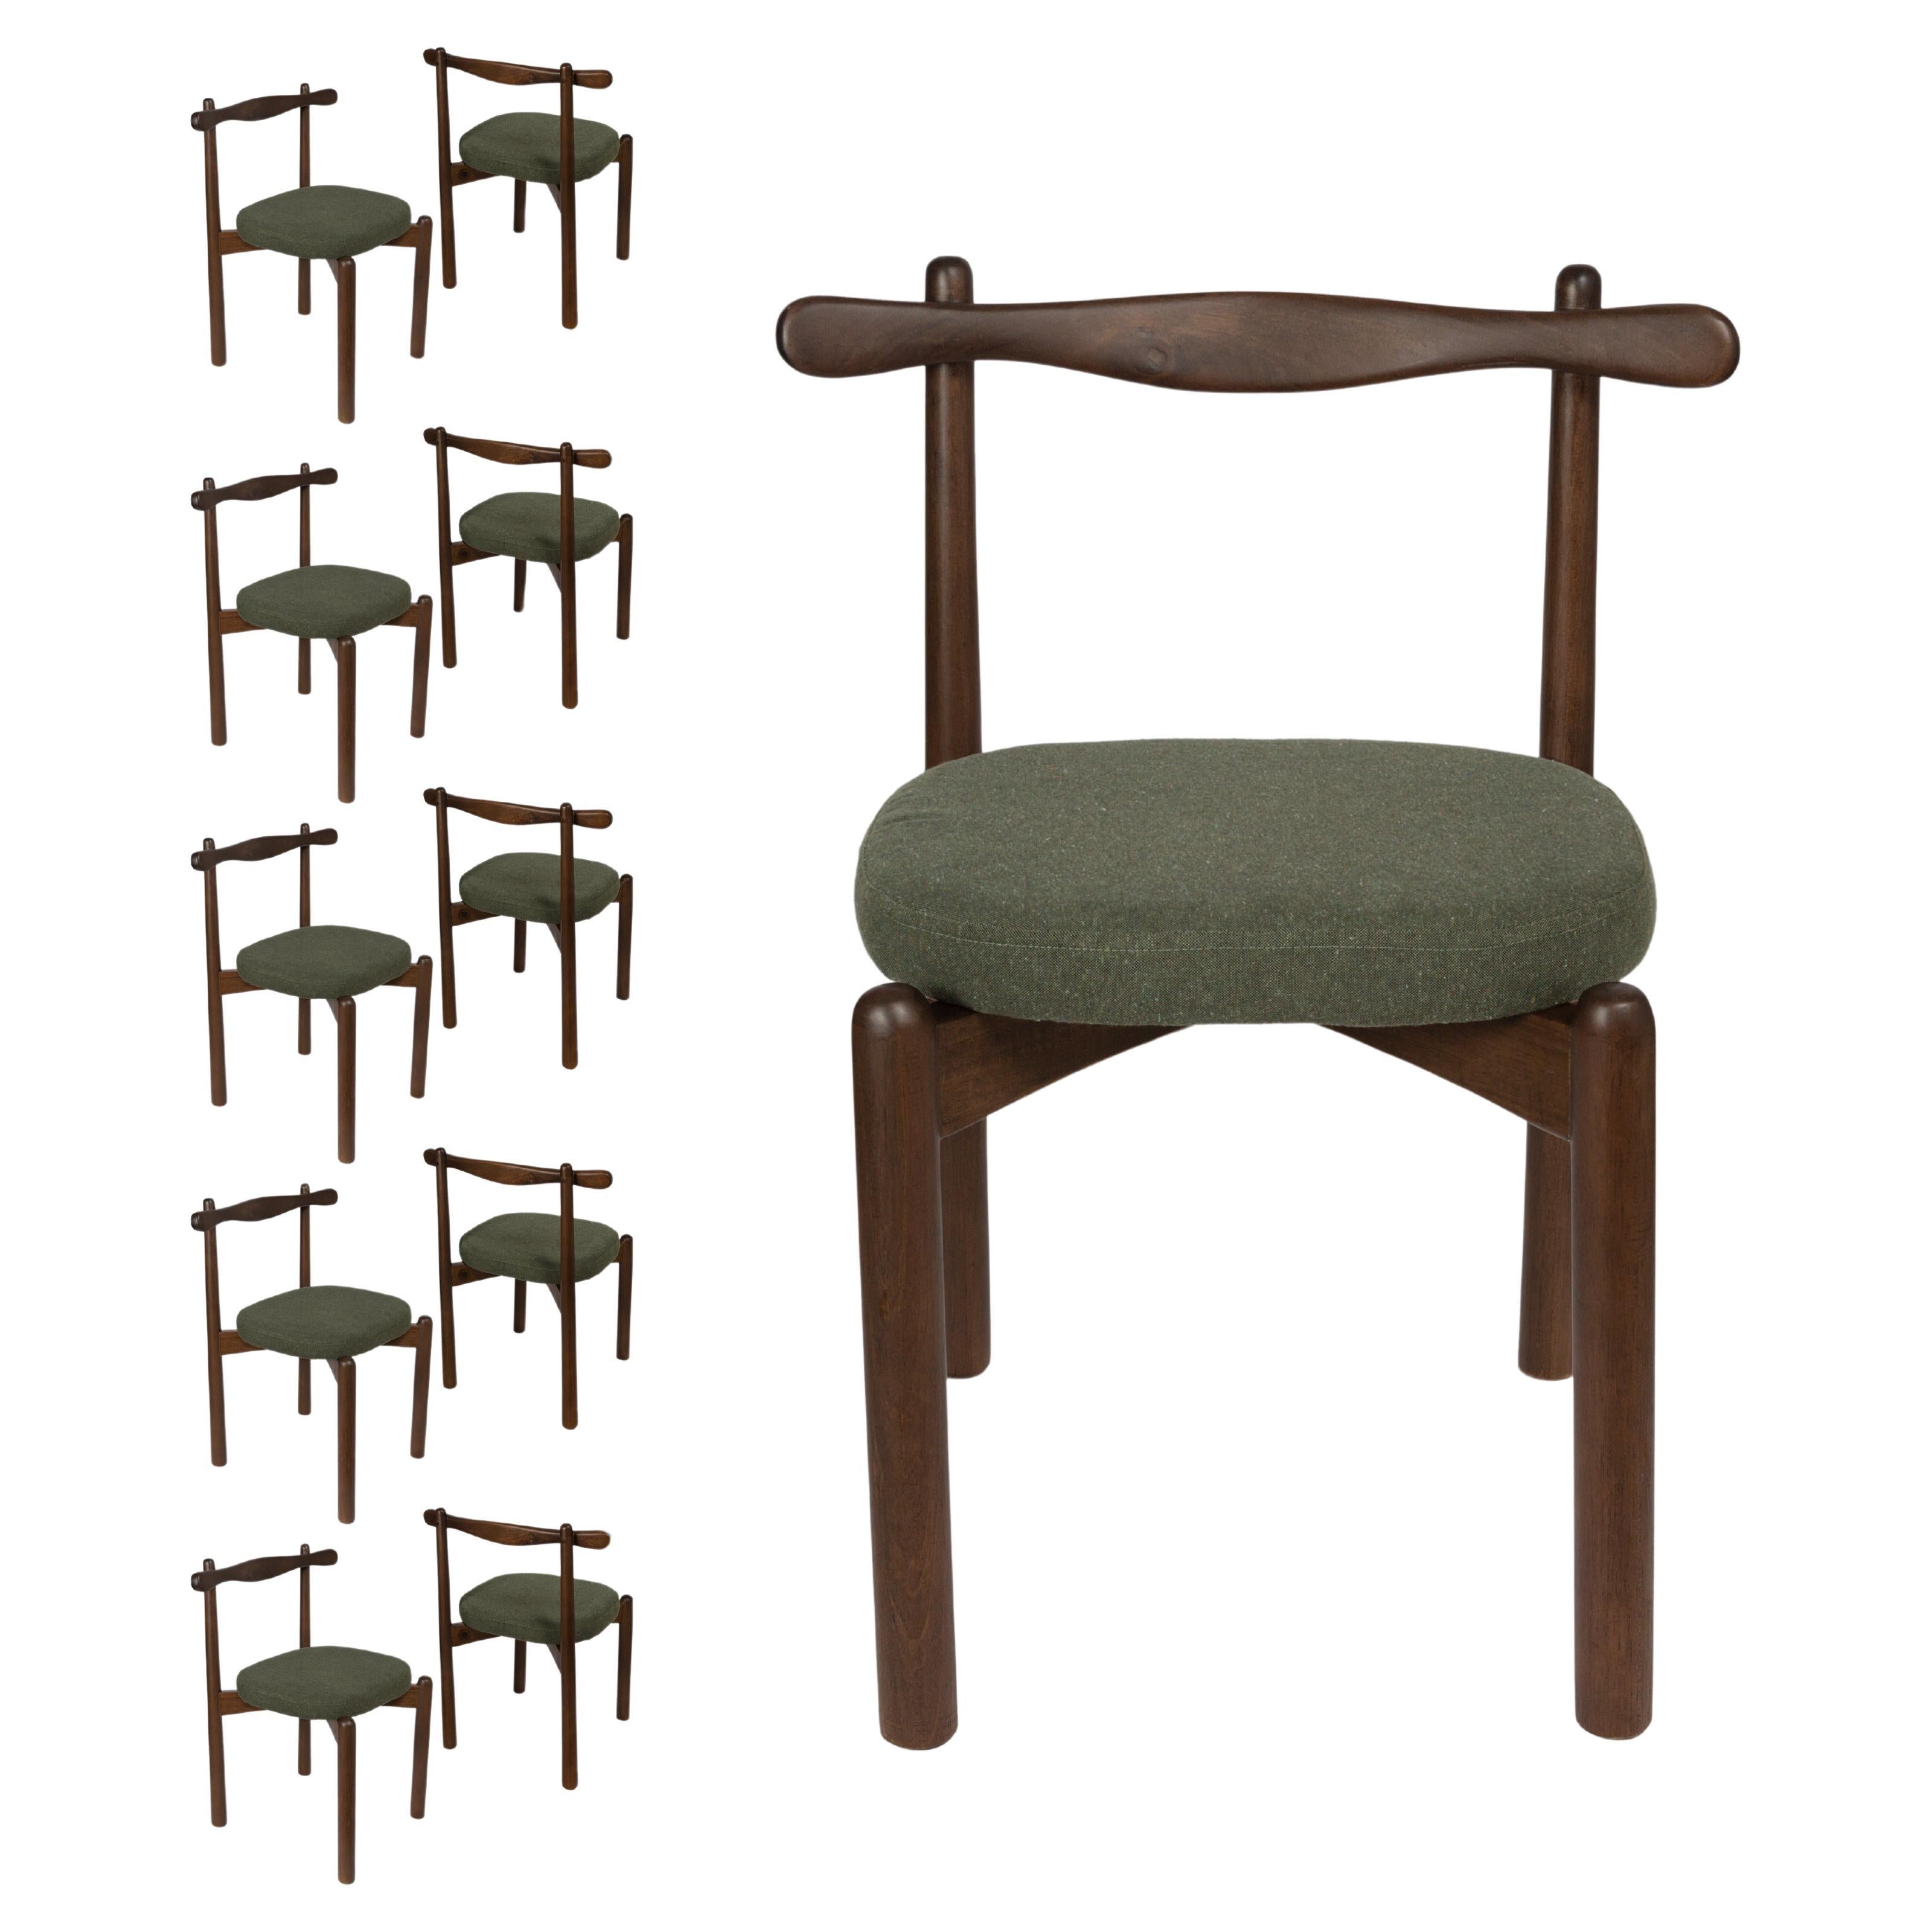 Set of 10 Dining Chairs Uçá Light Brown Wood (fabric ref : 17) For Sale